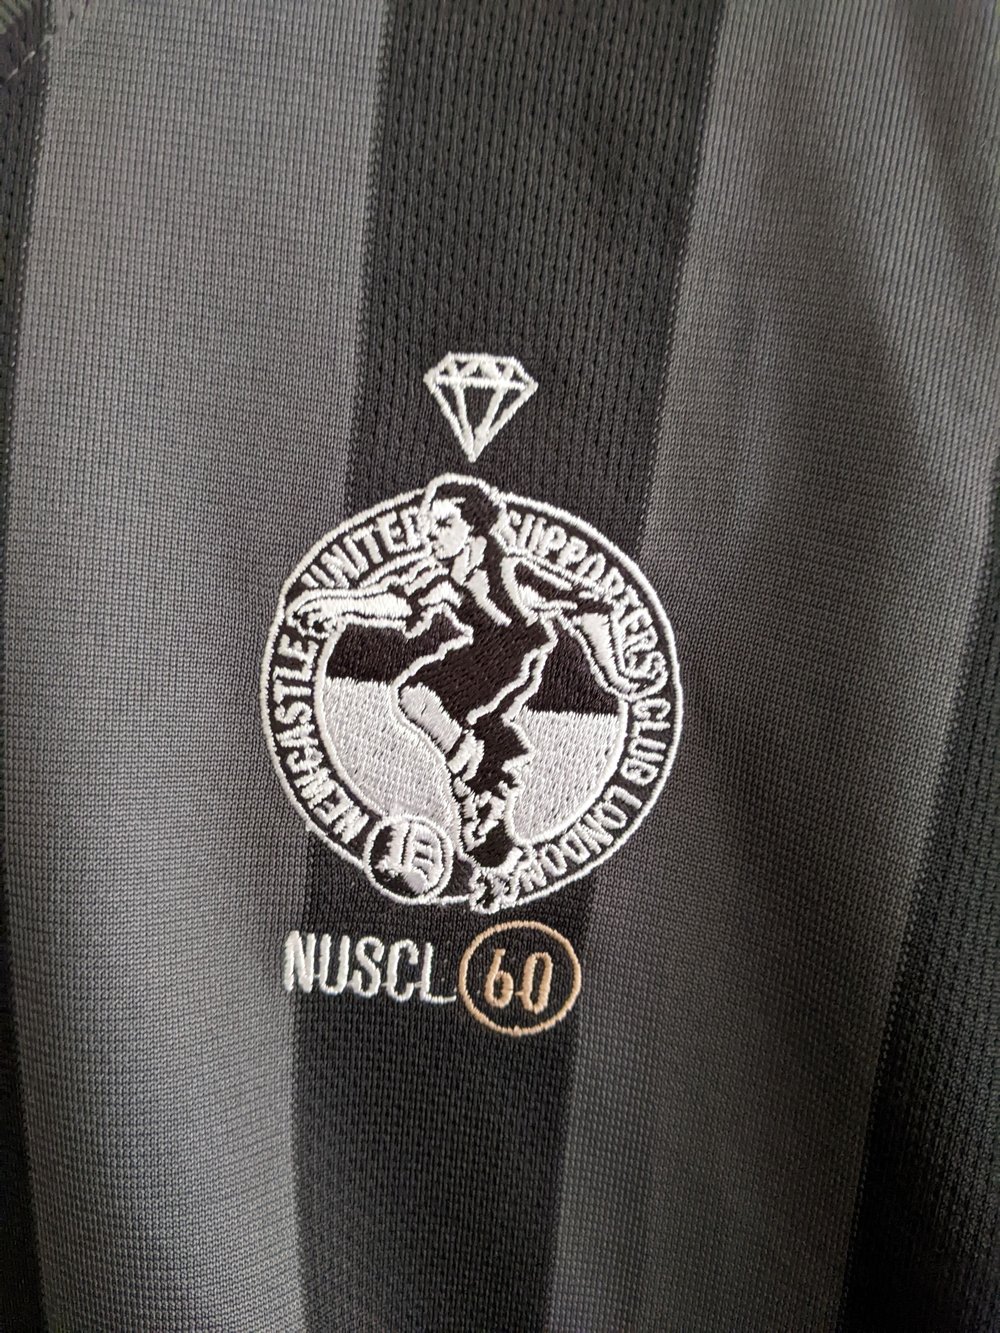 NUSCL 60th Anniversary Footy Top